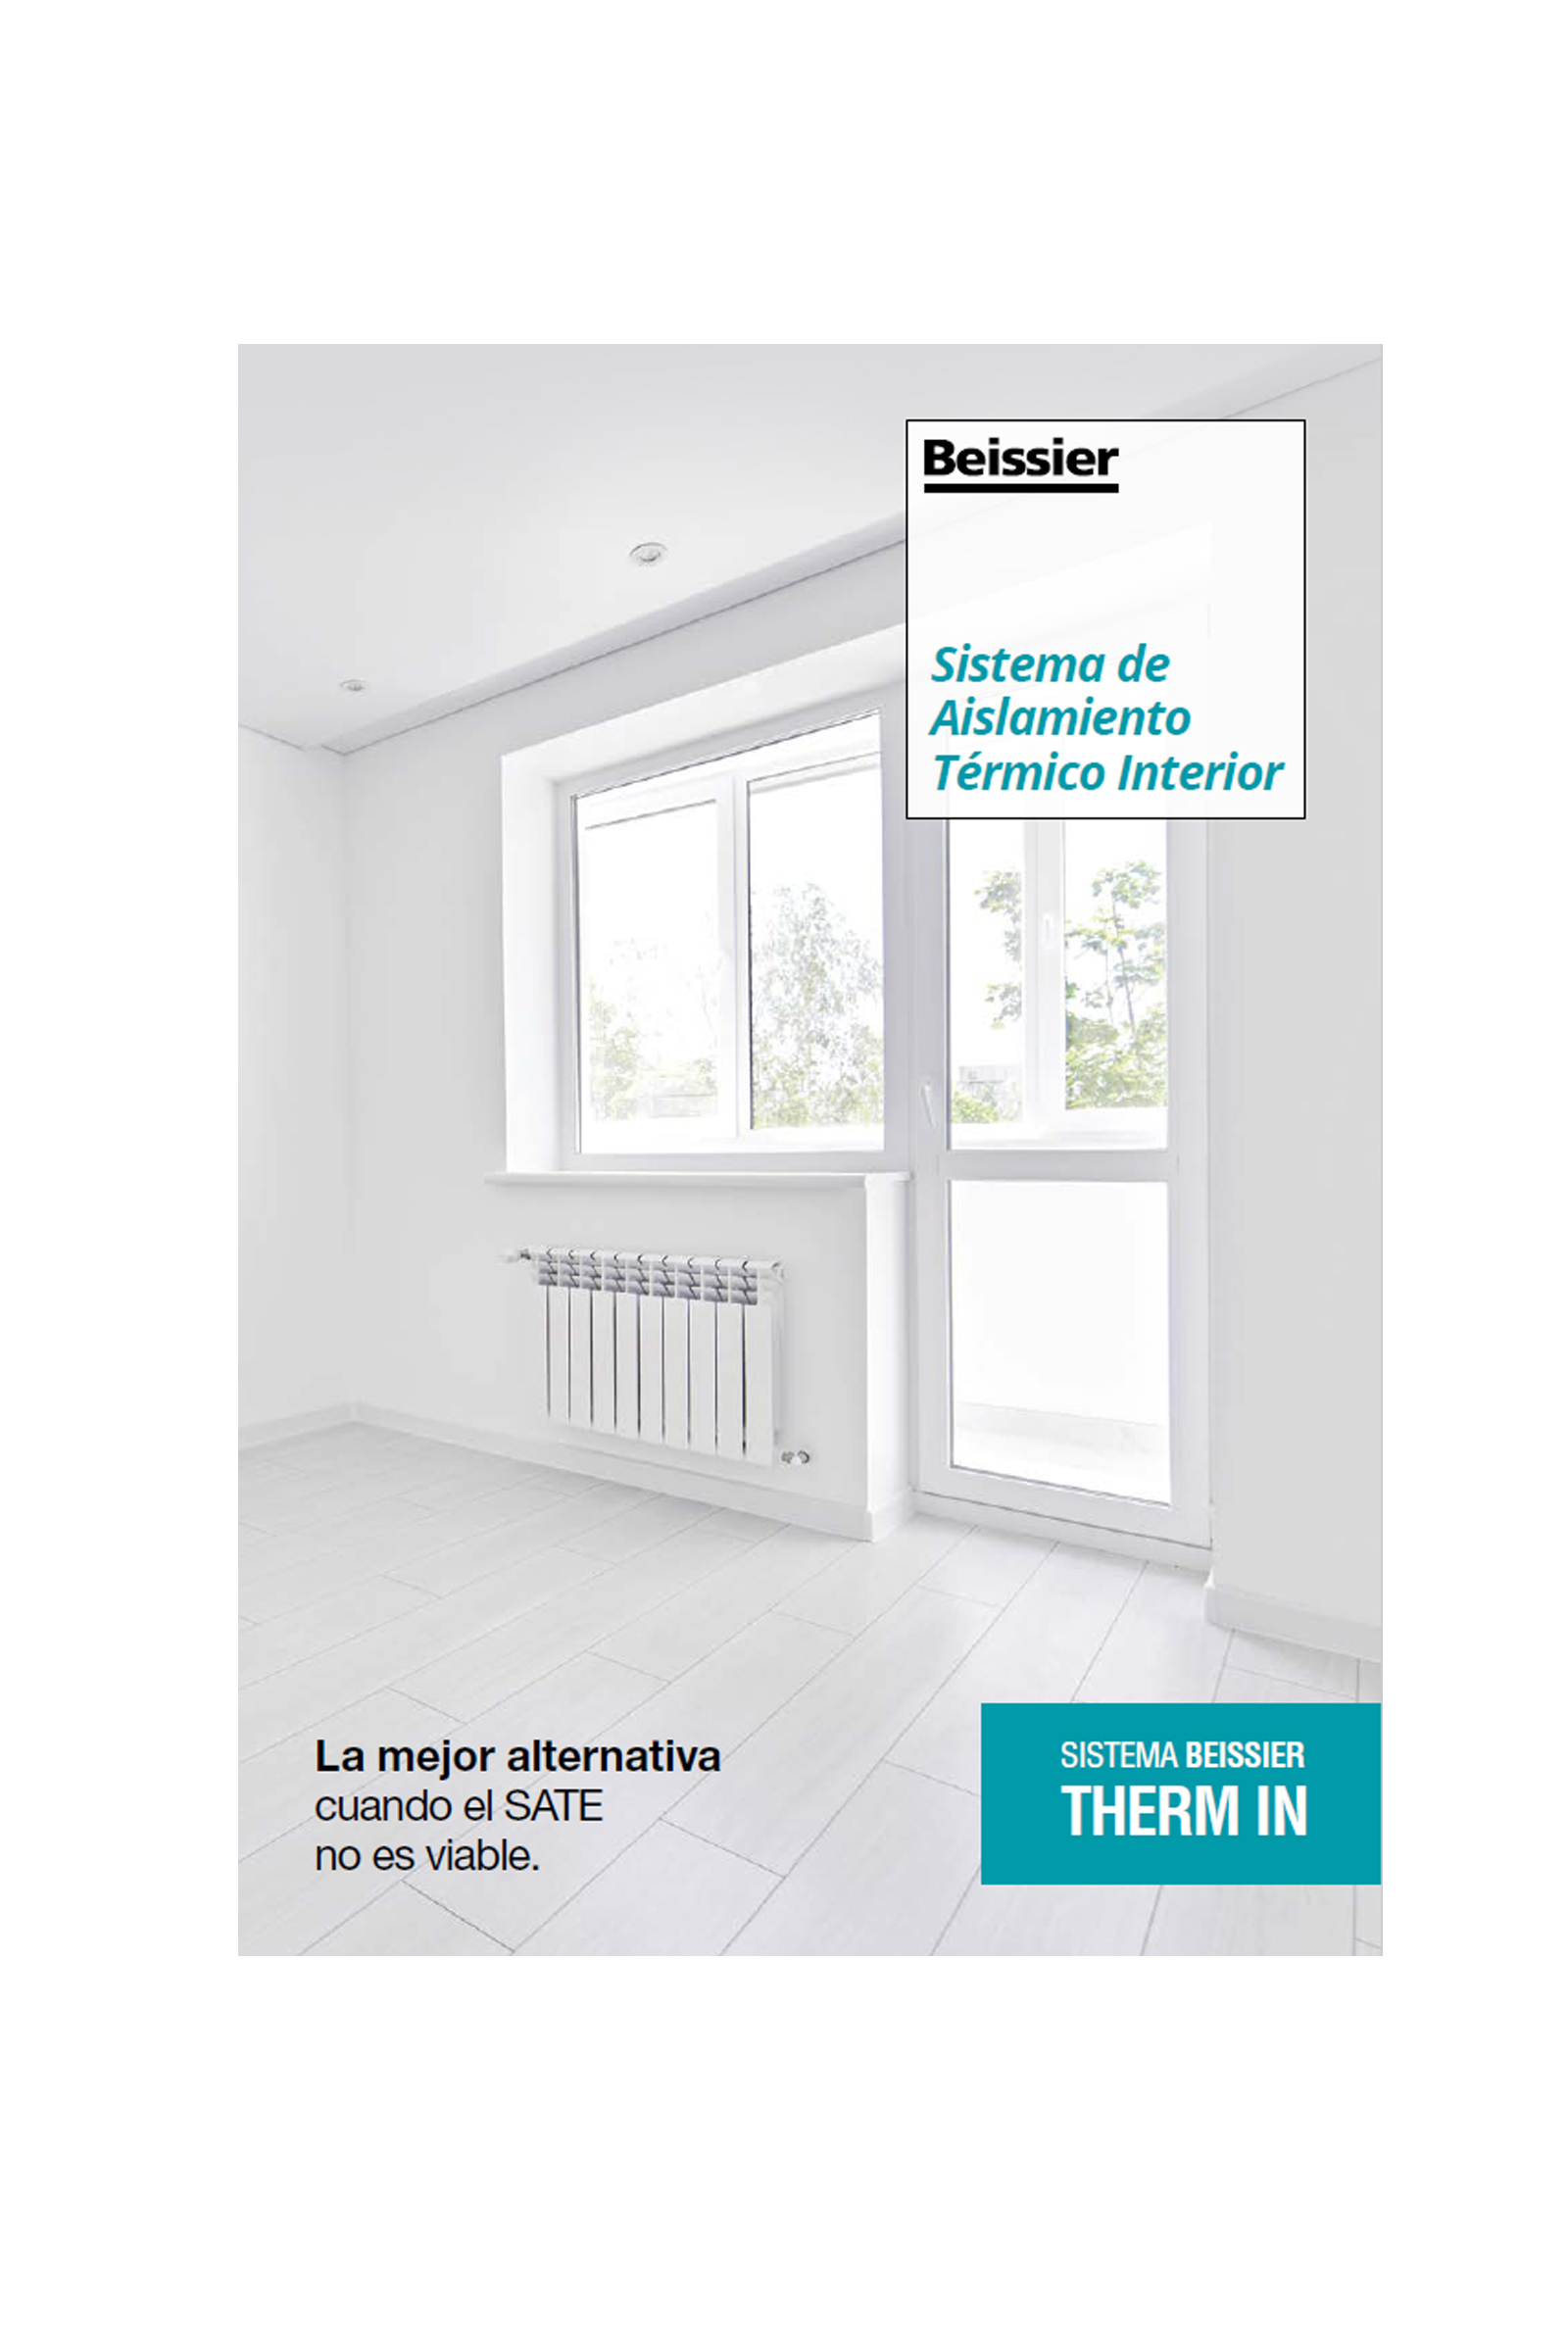 Diptico Sistema Beissier Therm In